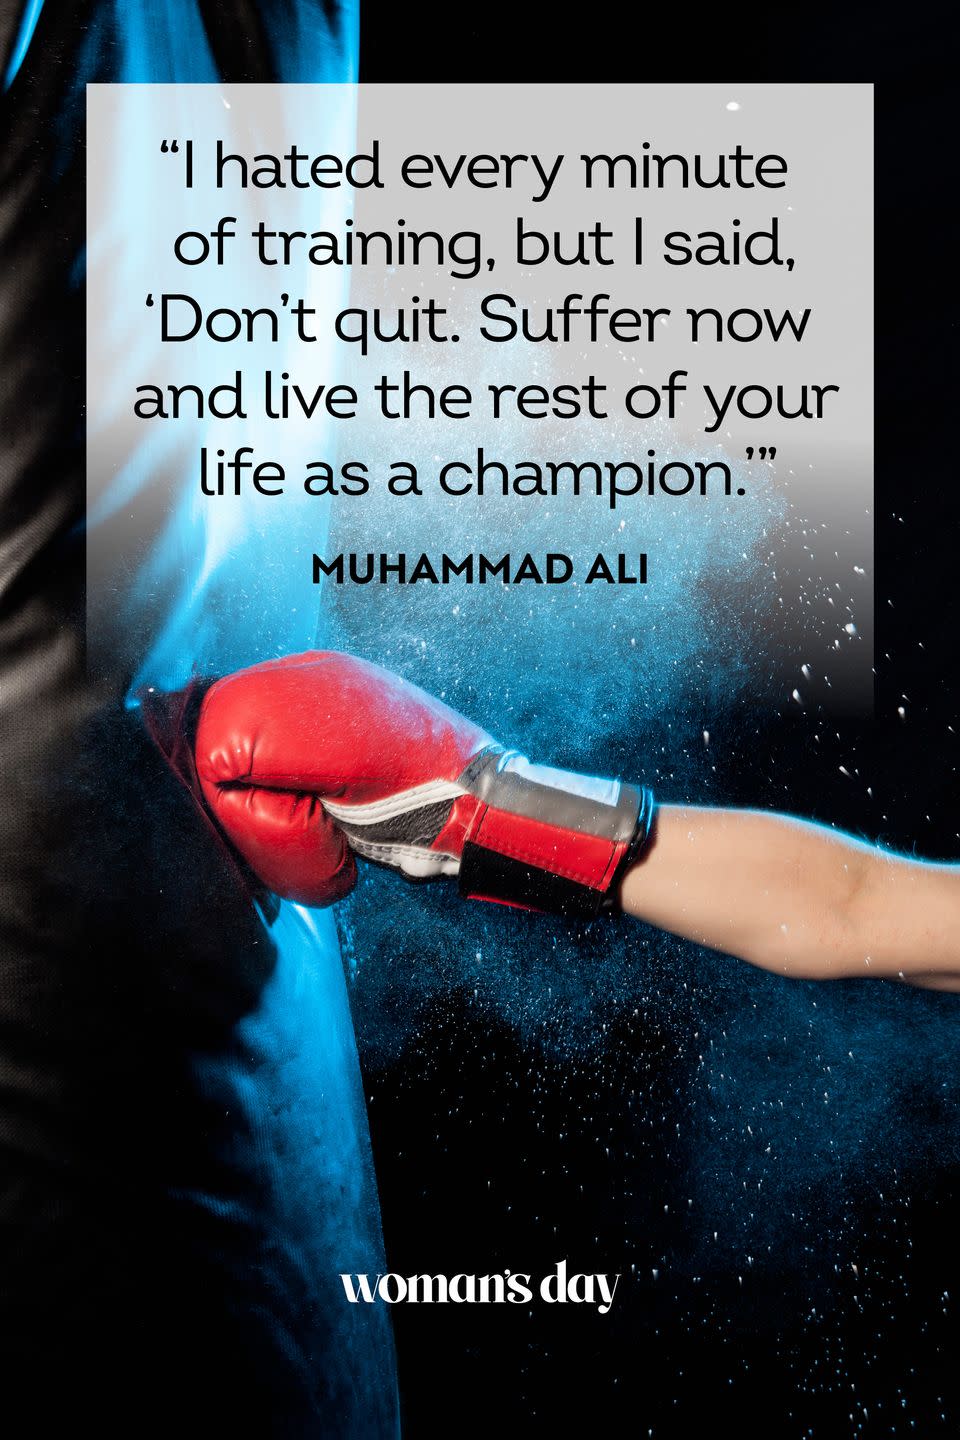 <p>“I hated every minute of training, but I said, ‘Don’t quit. Suffer now and live the rest of your life as a champion.'”</p>